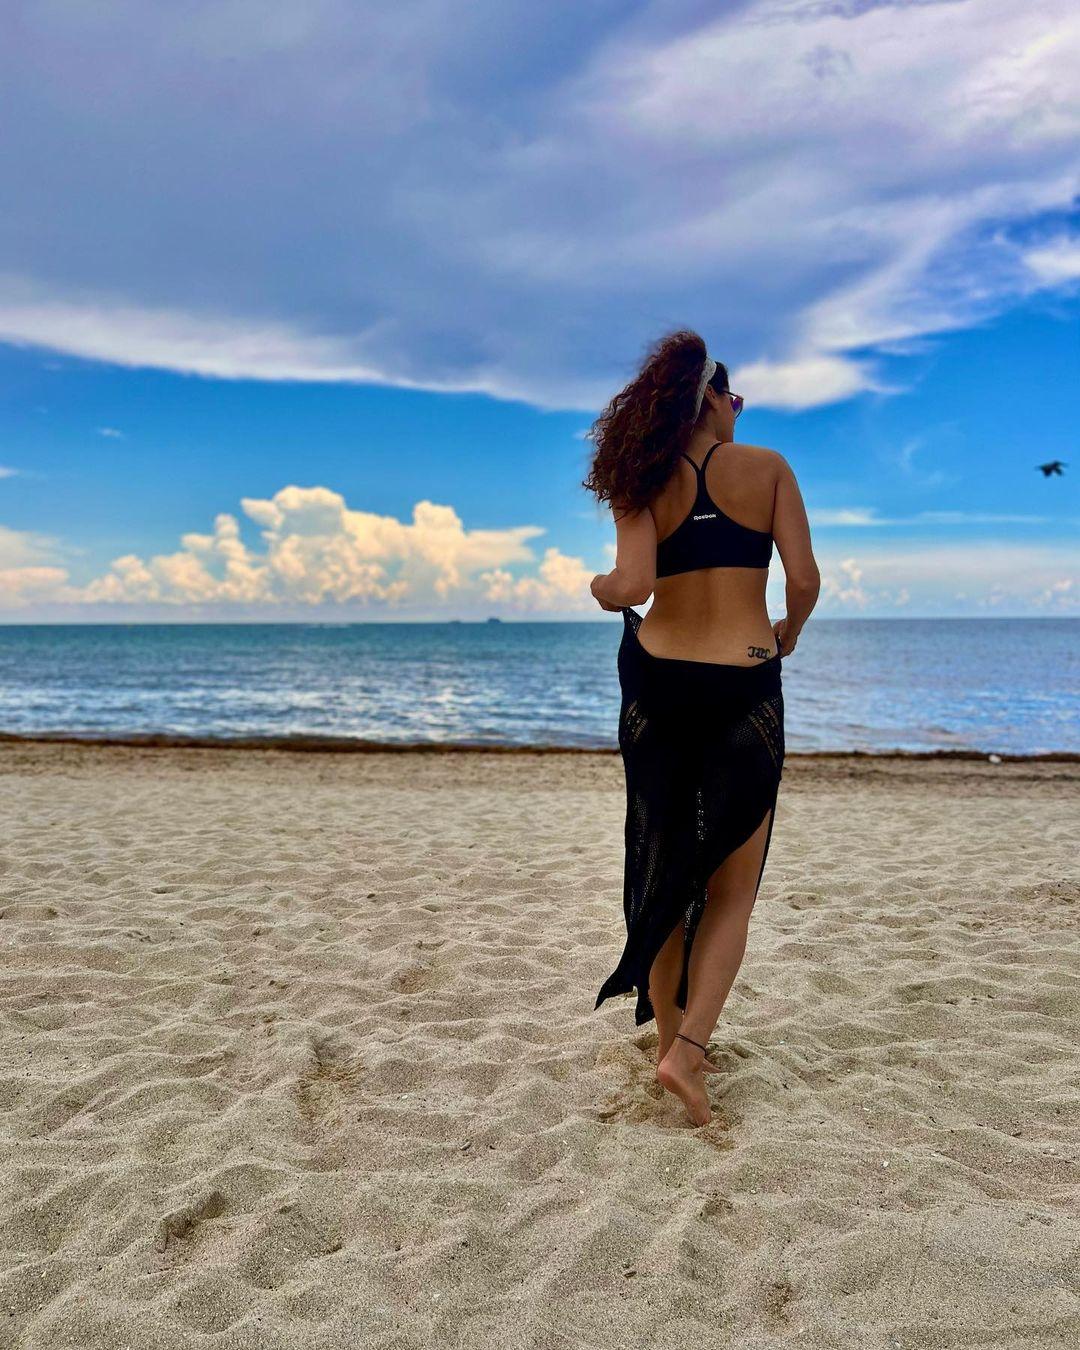 This is a summer fashion inspiration gallery, so a beach picture is a must! Taapsee likes to wear comfortable tops along with sarongs that allow her to feel comfortable and have fun at the beach